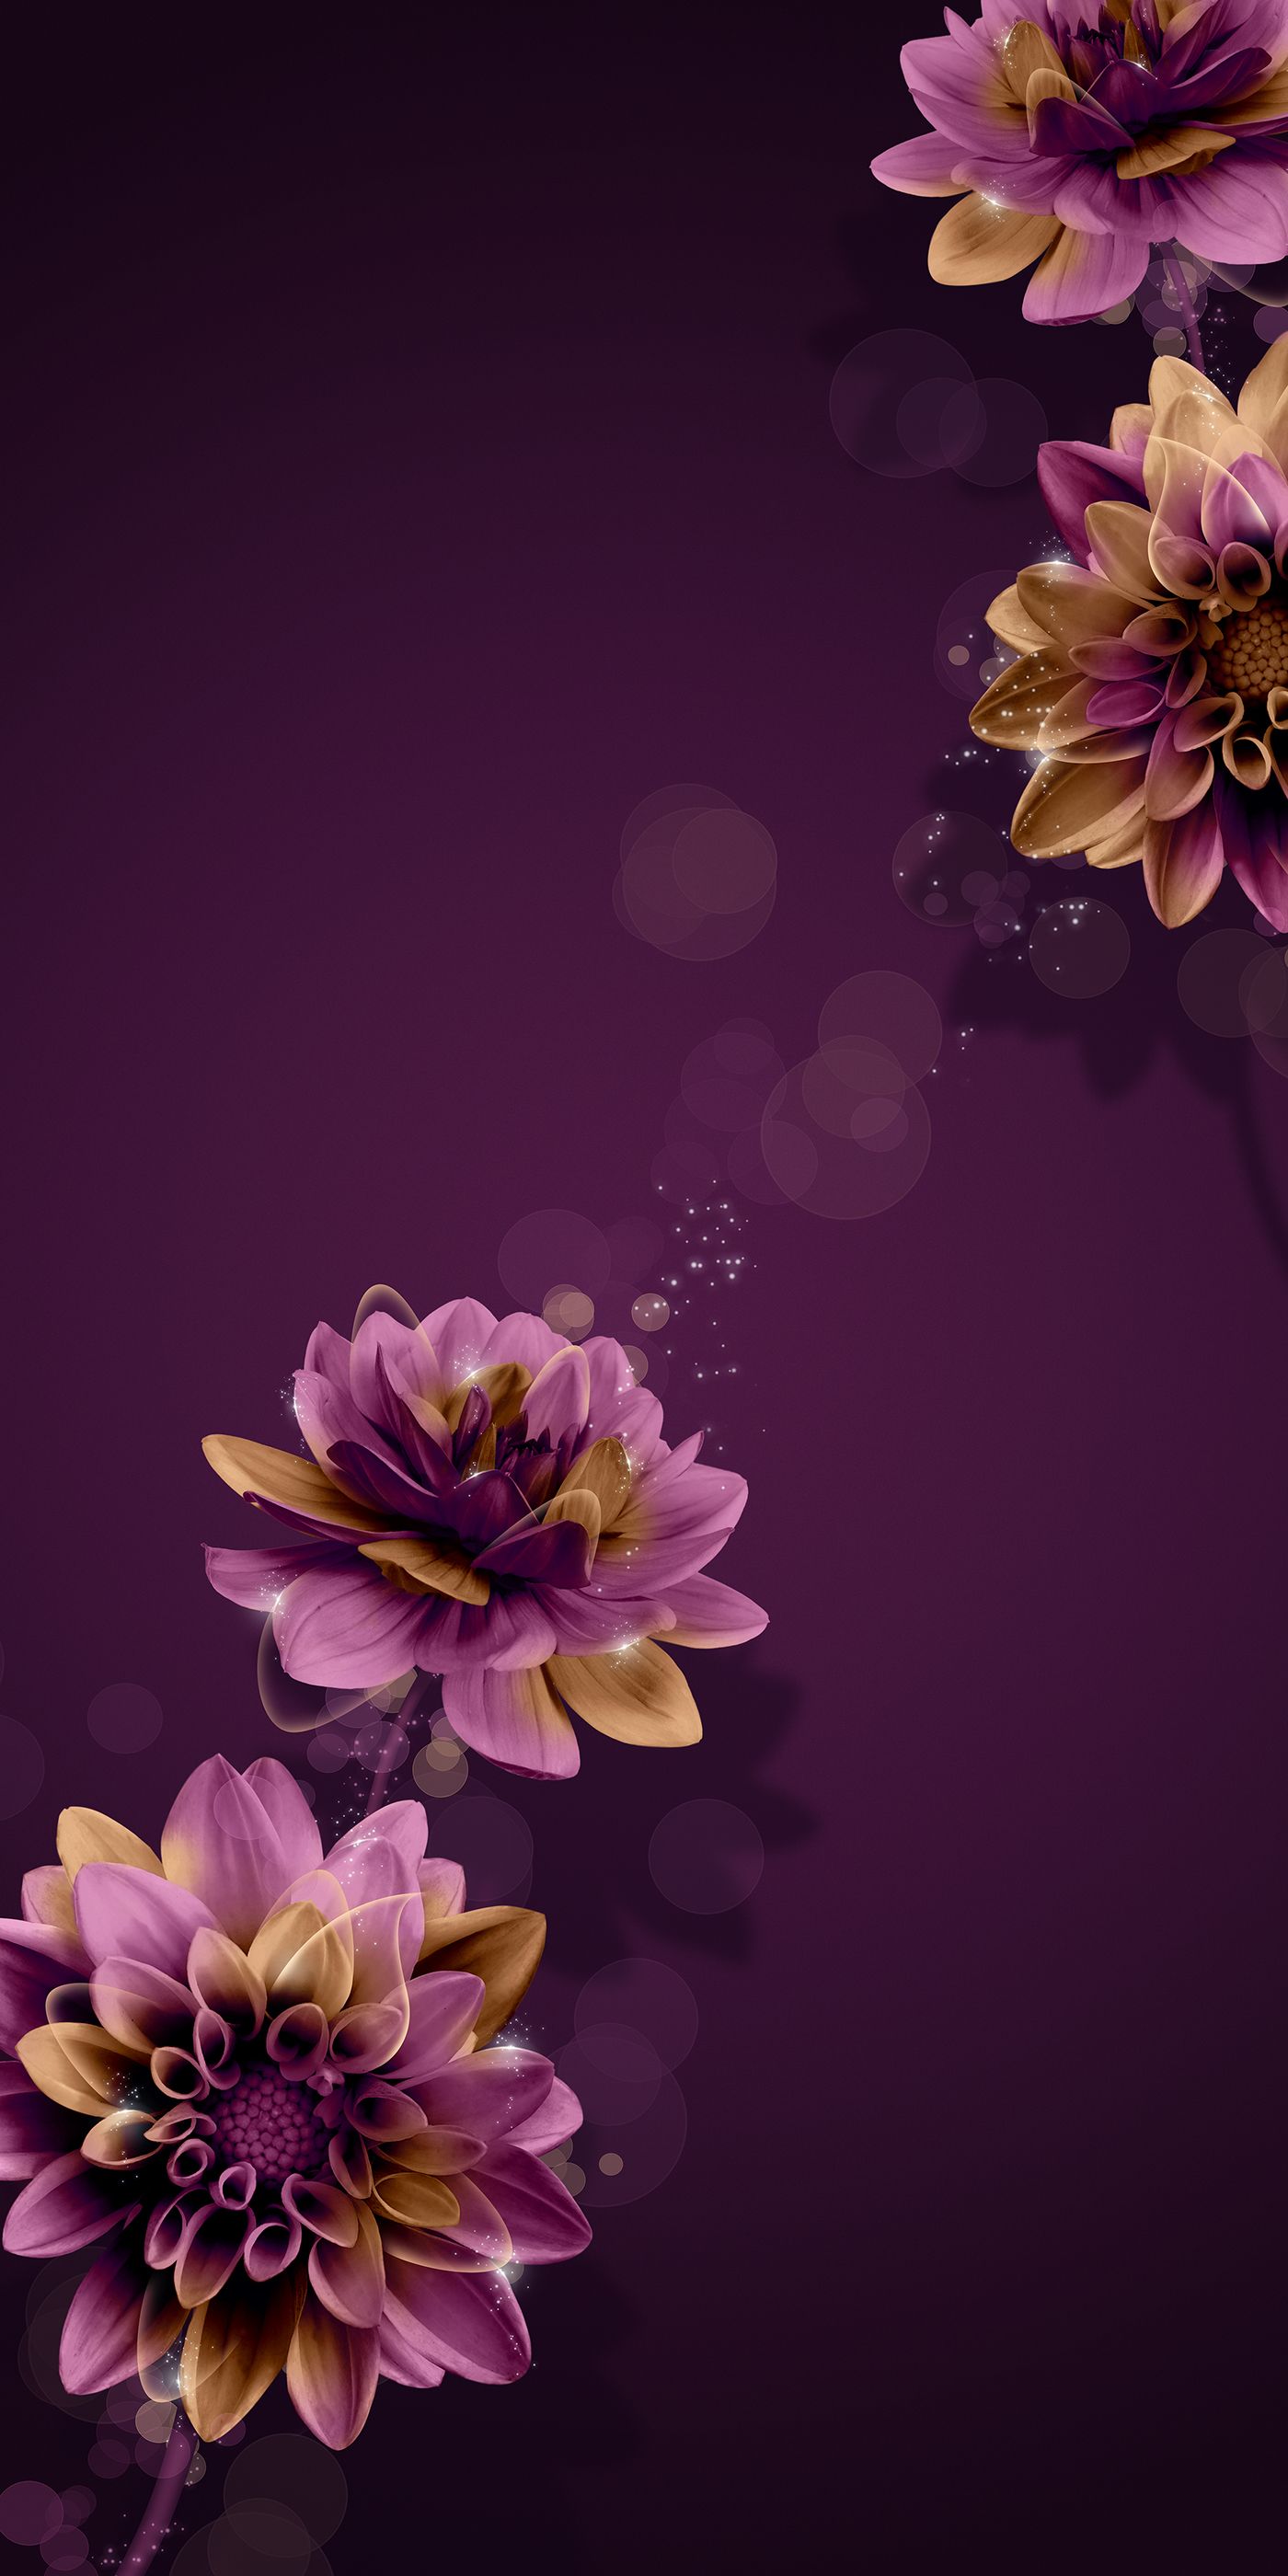 Co Working Together With LG Hausys On A Variety Of Flower Visuals And Patterns. The Visuals W. Floral Wallpaper, Floral Wallpaper Desktop, Flower Iphone Wallpaper